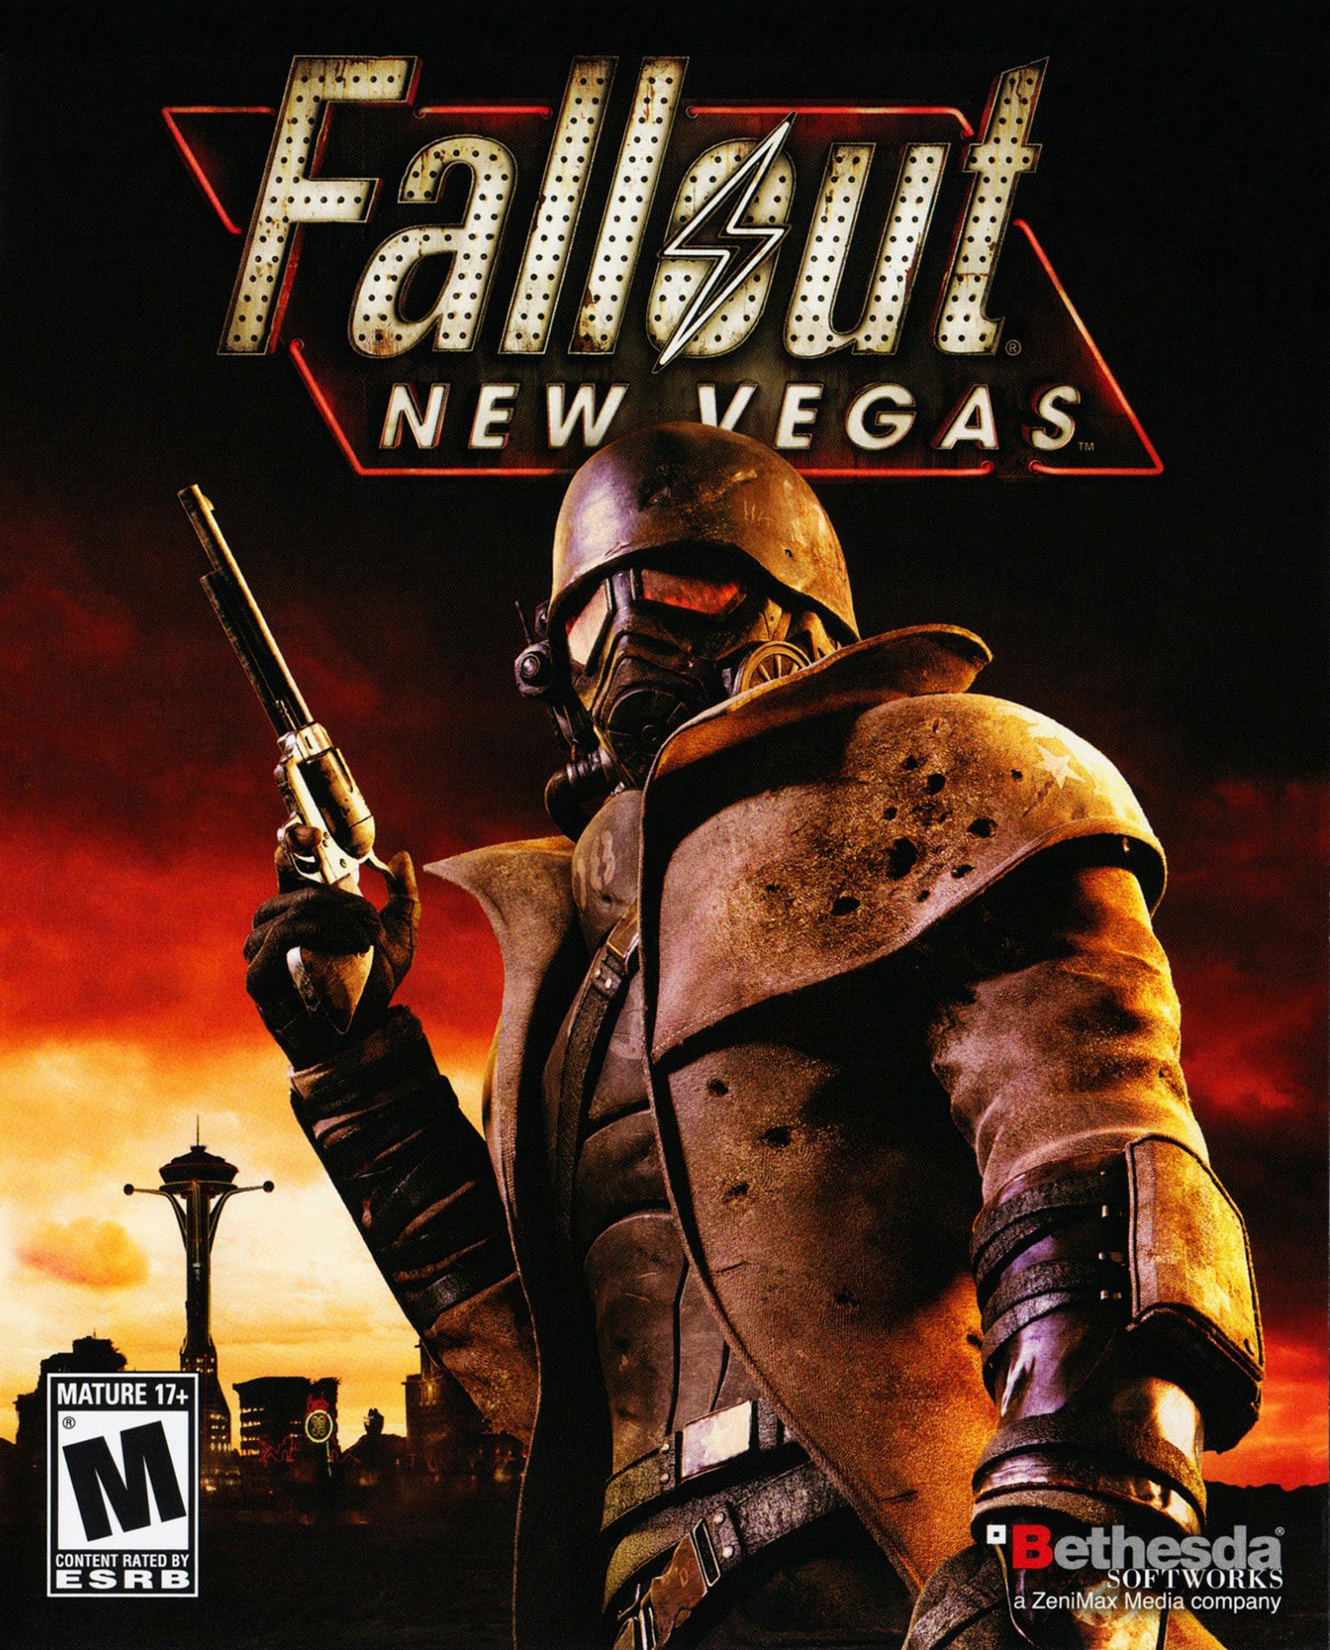 Fallout 3 Crash Fix for Windows 7, 8, 8.1, and 10 for Fallout: New Vegas